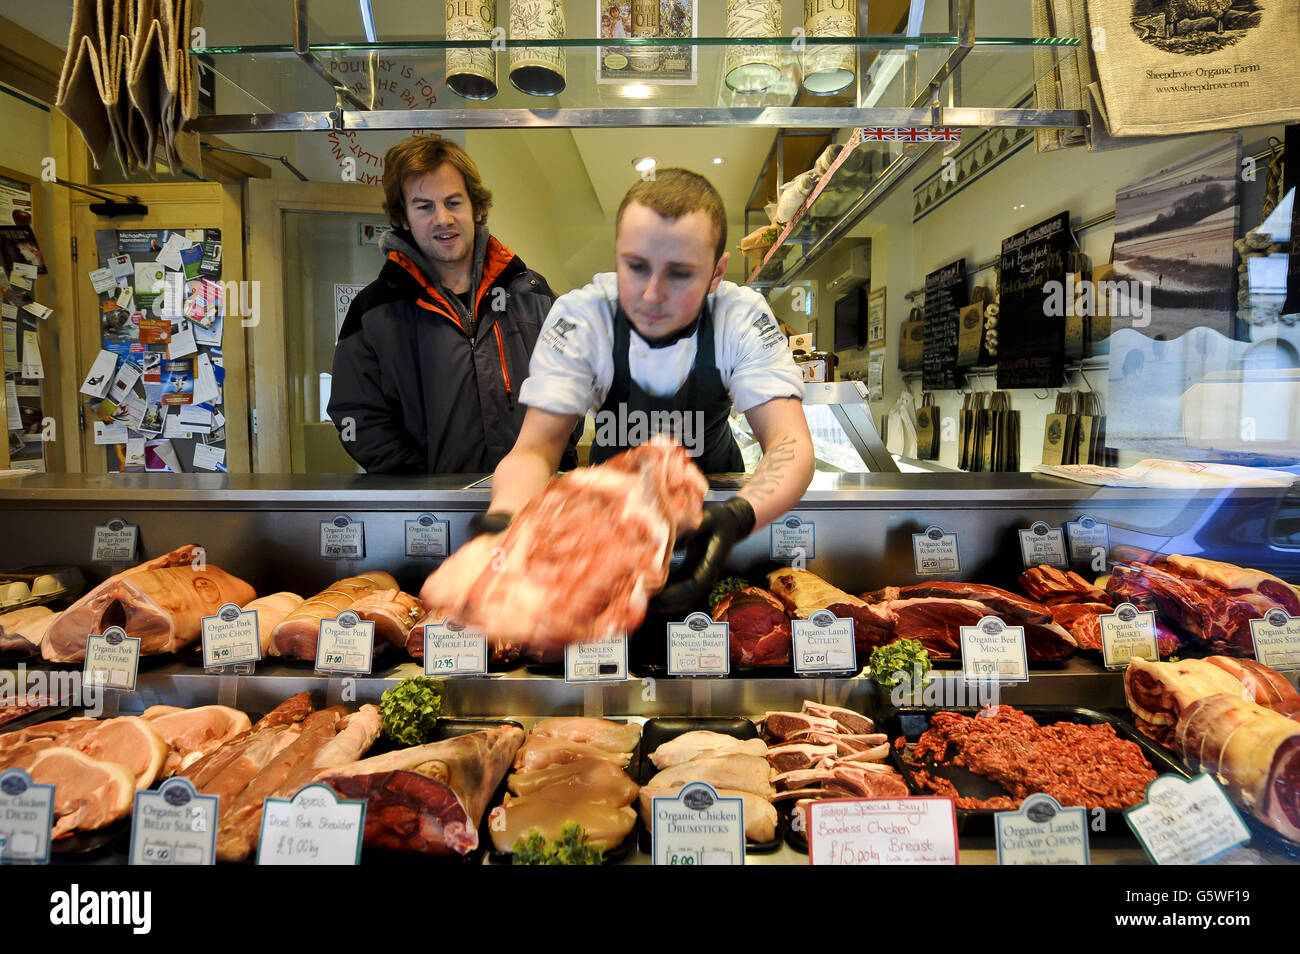 Butcher Paul Gyorgy reaches for a piece of meat for a customer at the Sheepdrove Organic Farm shop in Bristol. Stock Photo